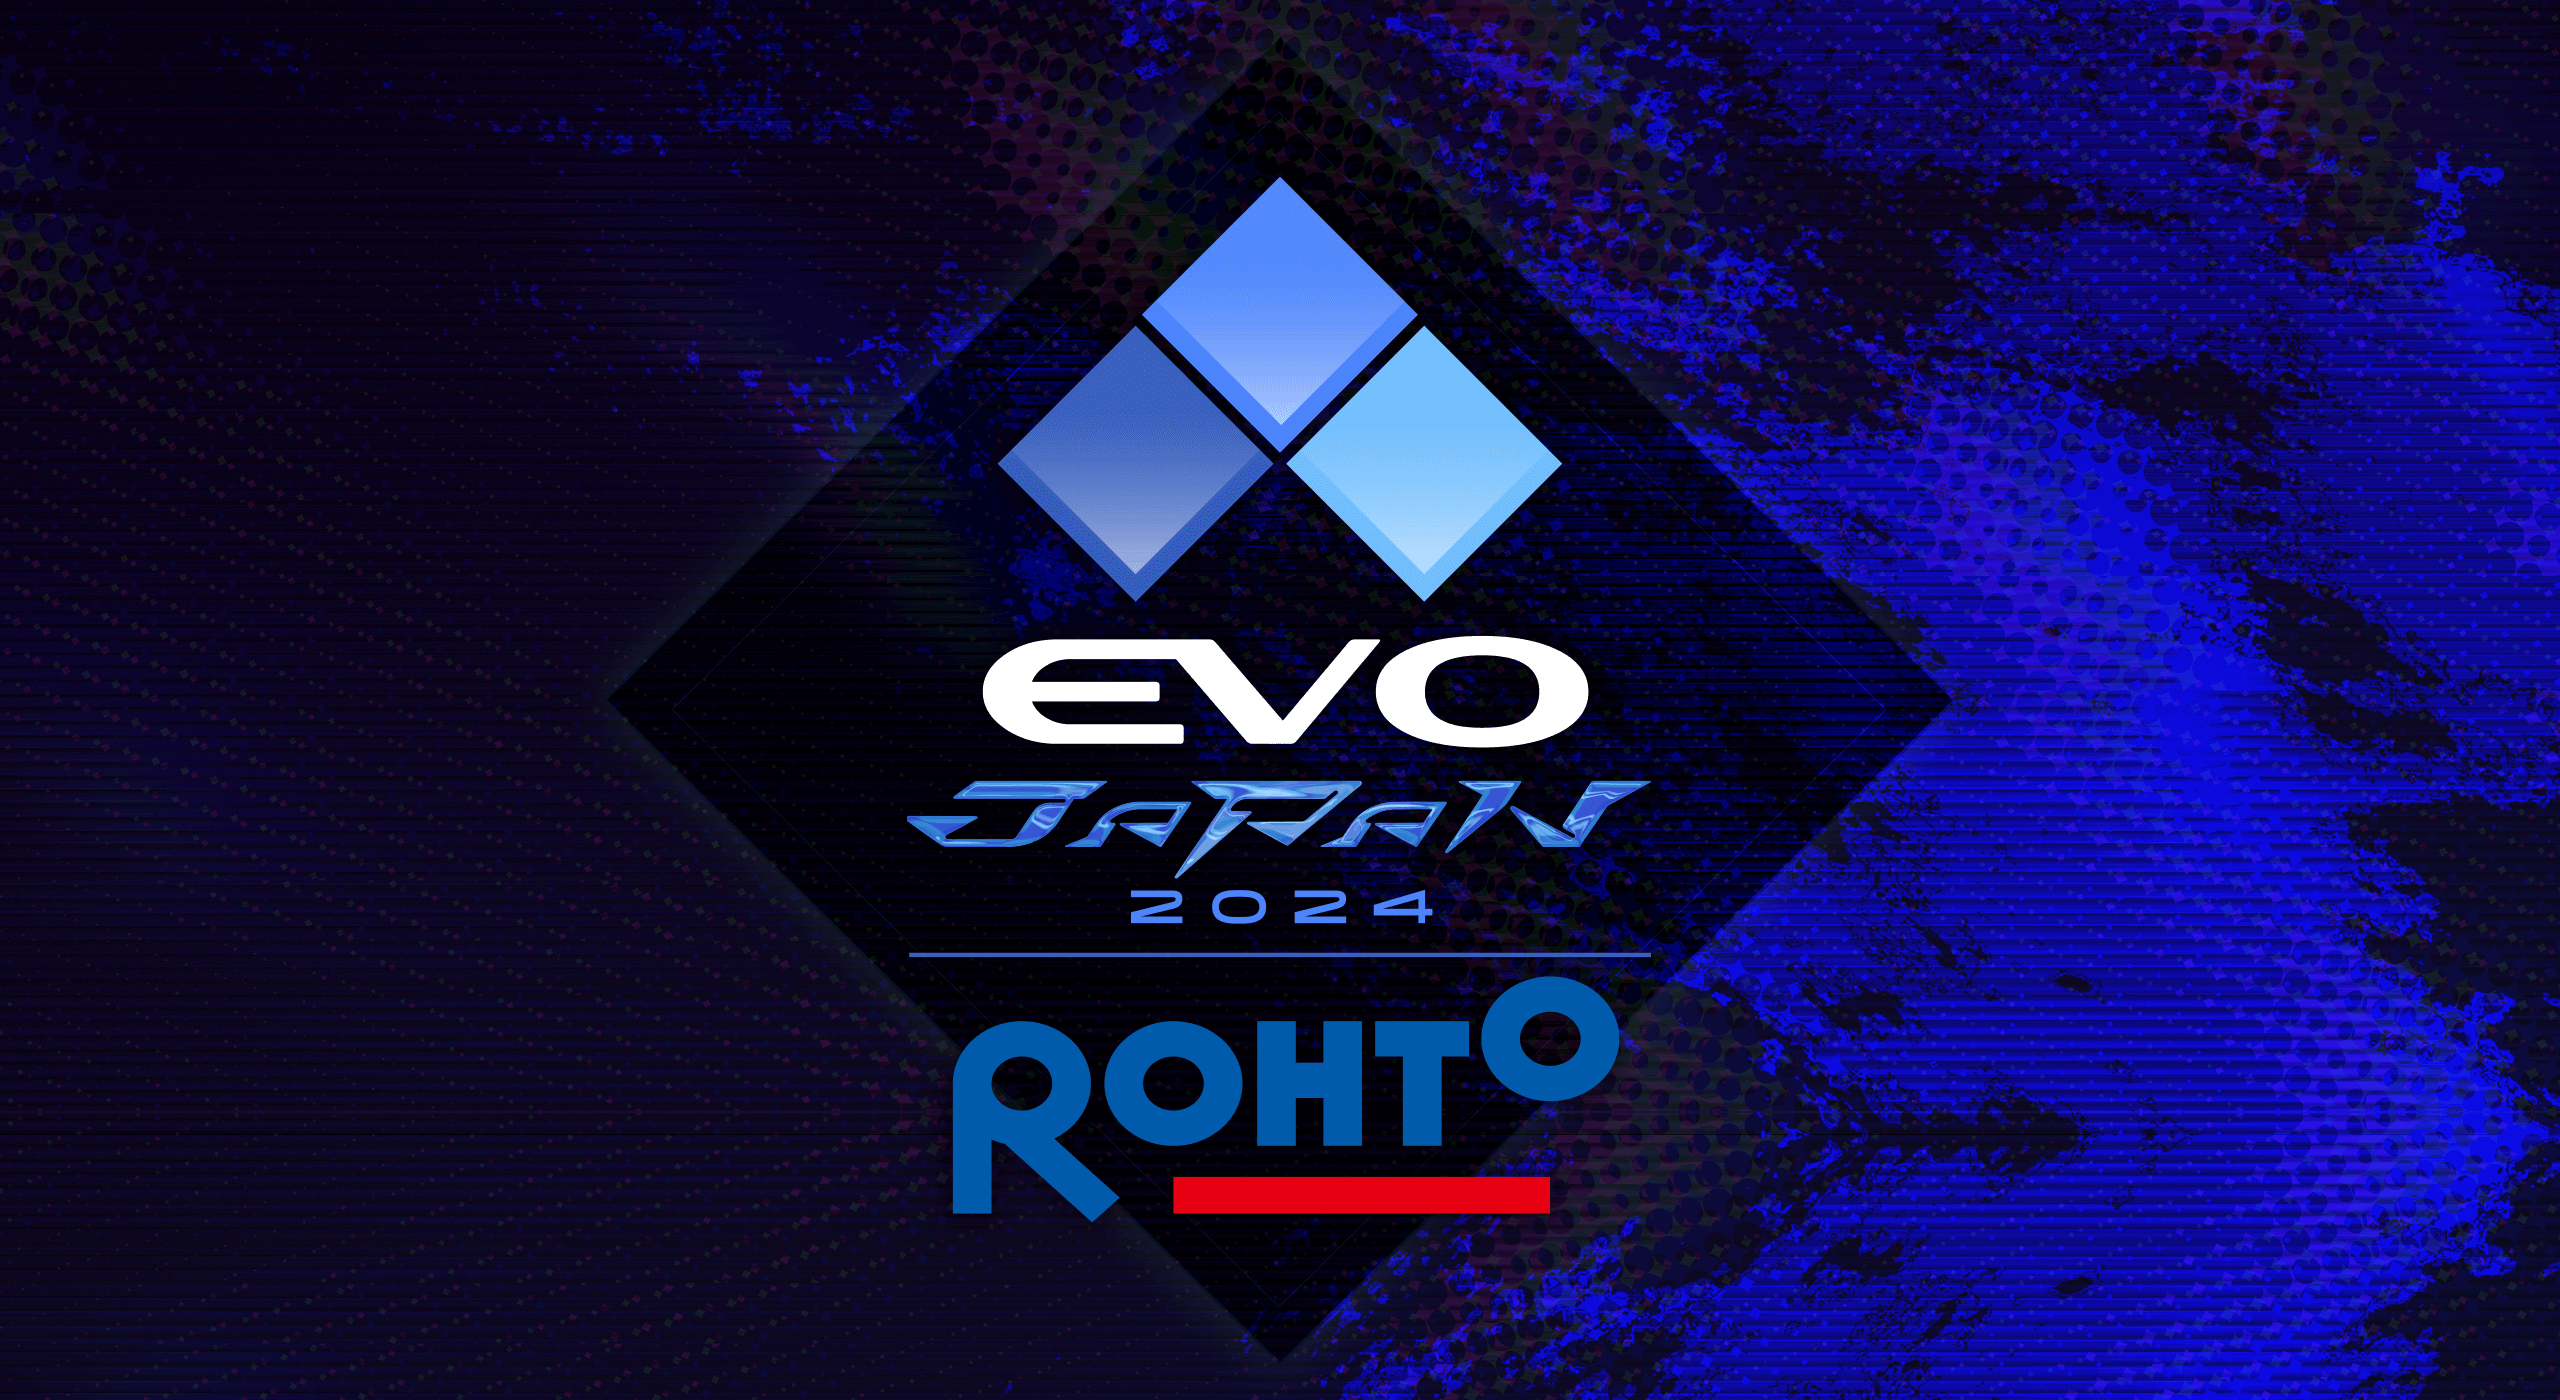 Evo Japan Released the Streaming Guidelines and Application Form